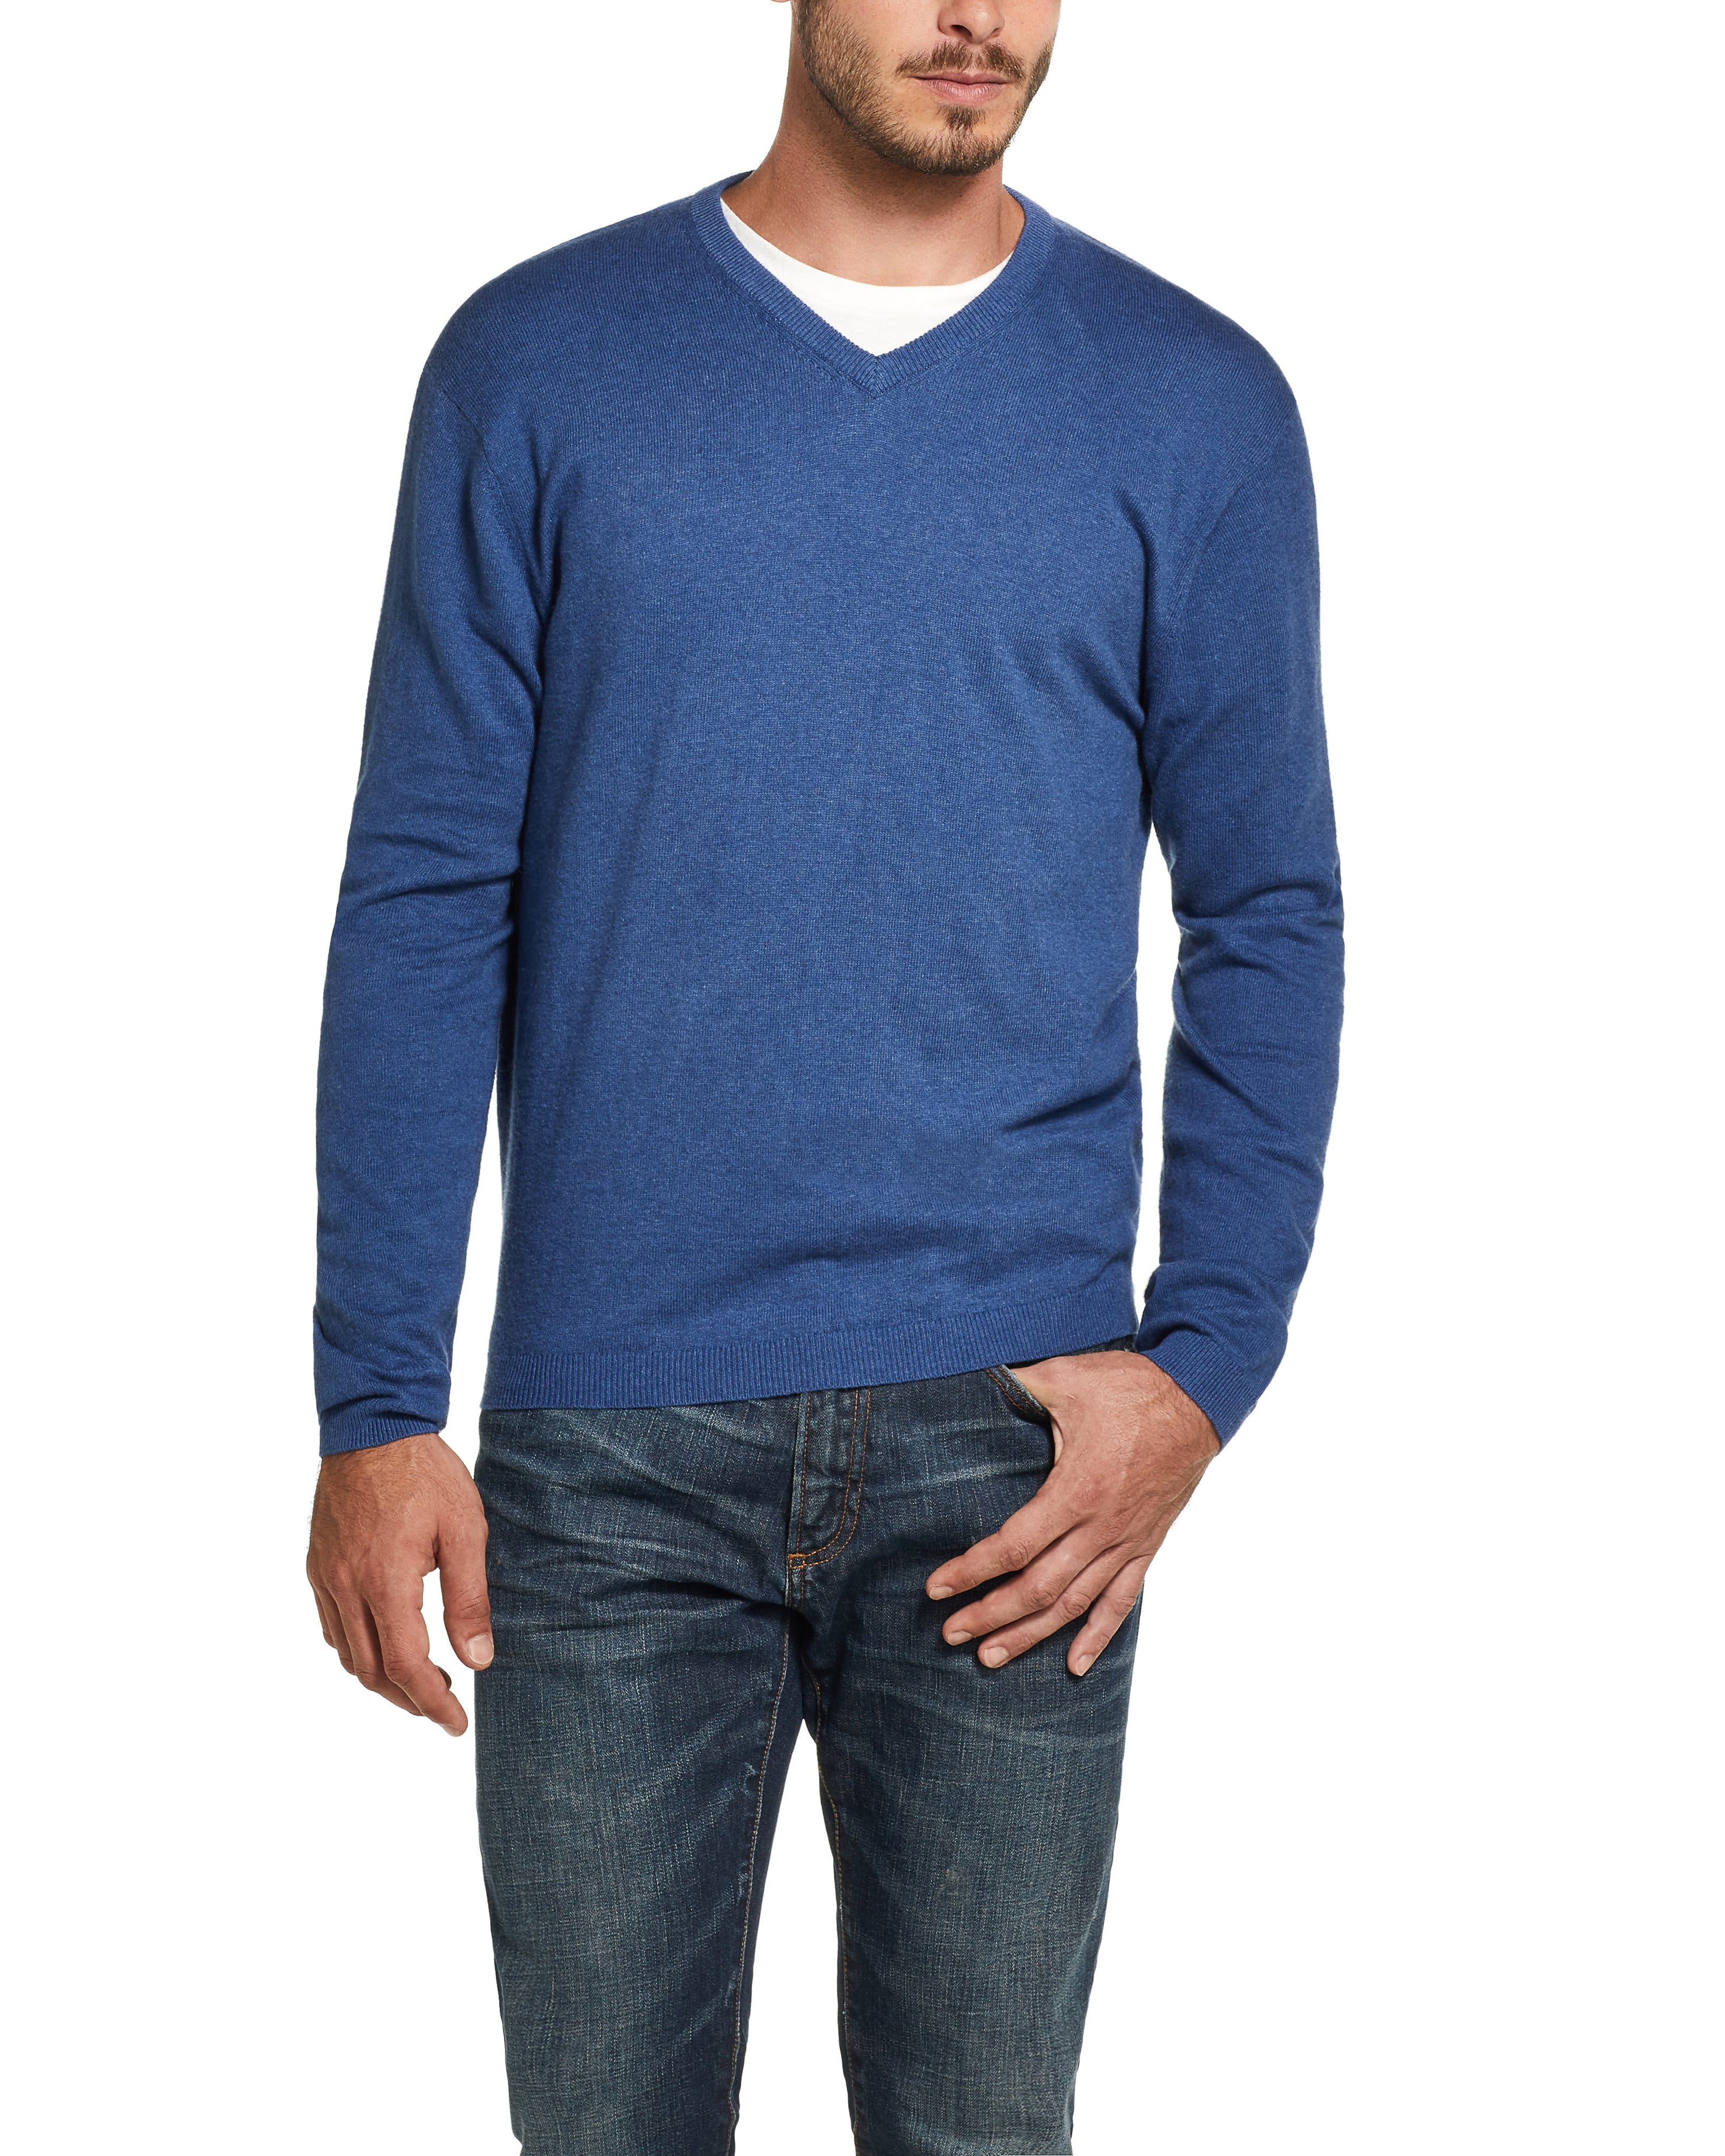 Cotton Cashmere V Neck Sweater in Lake Heather